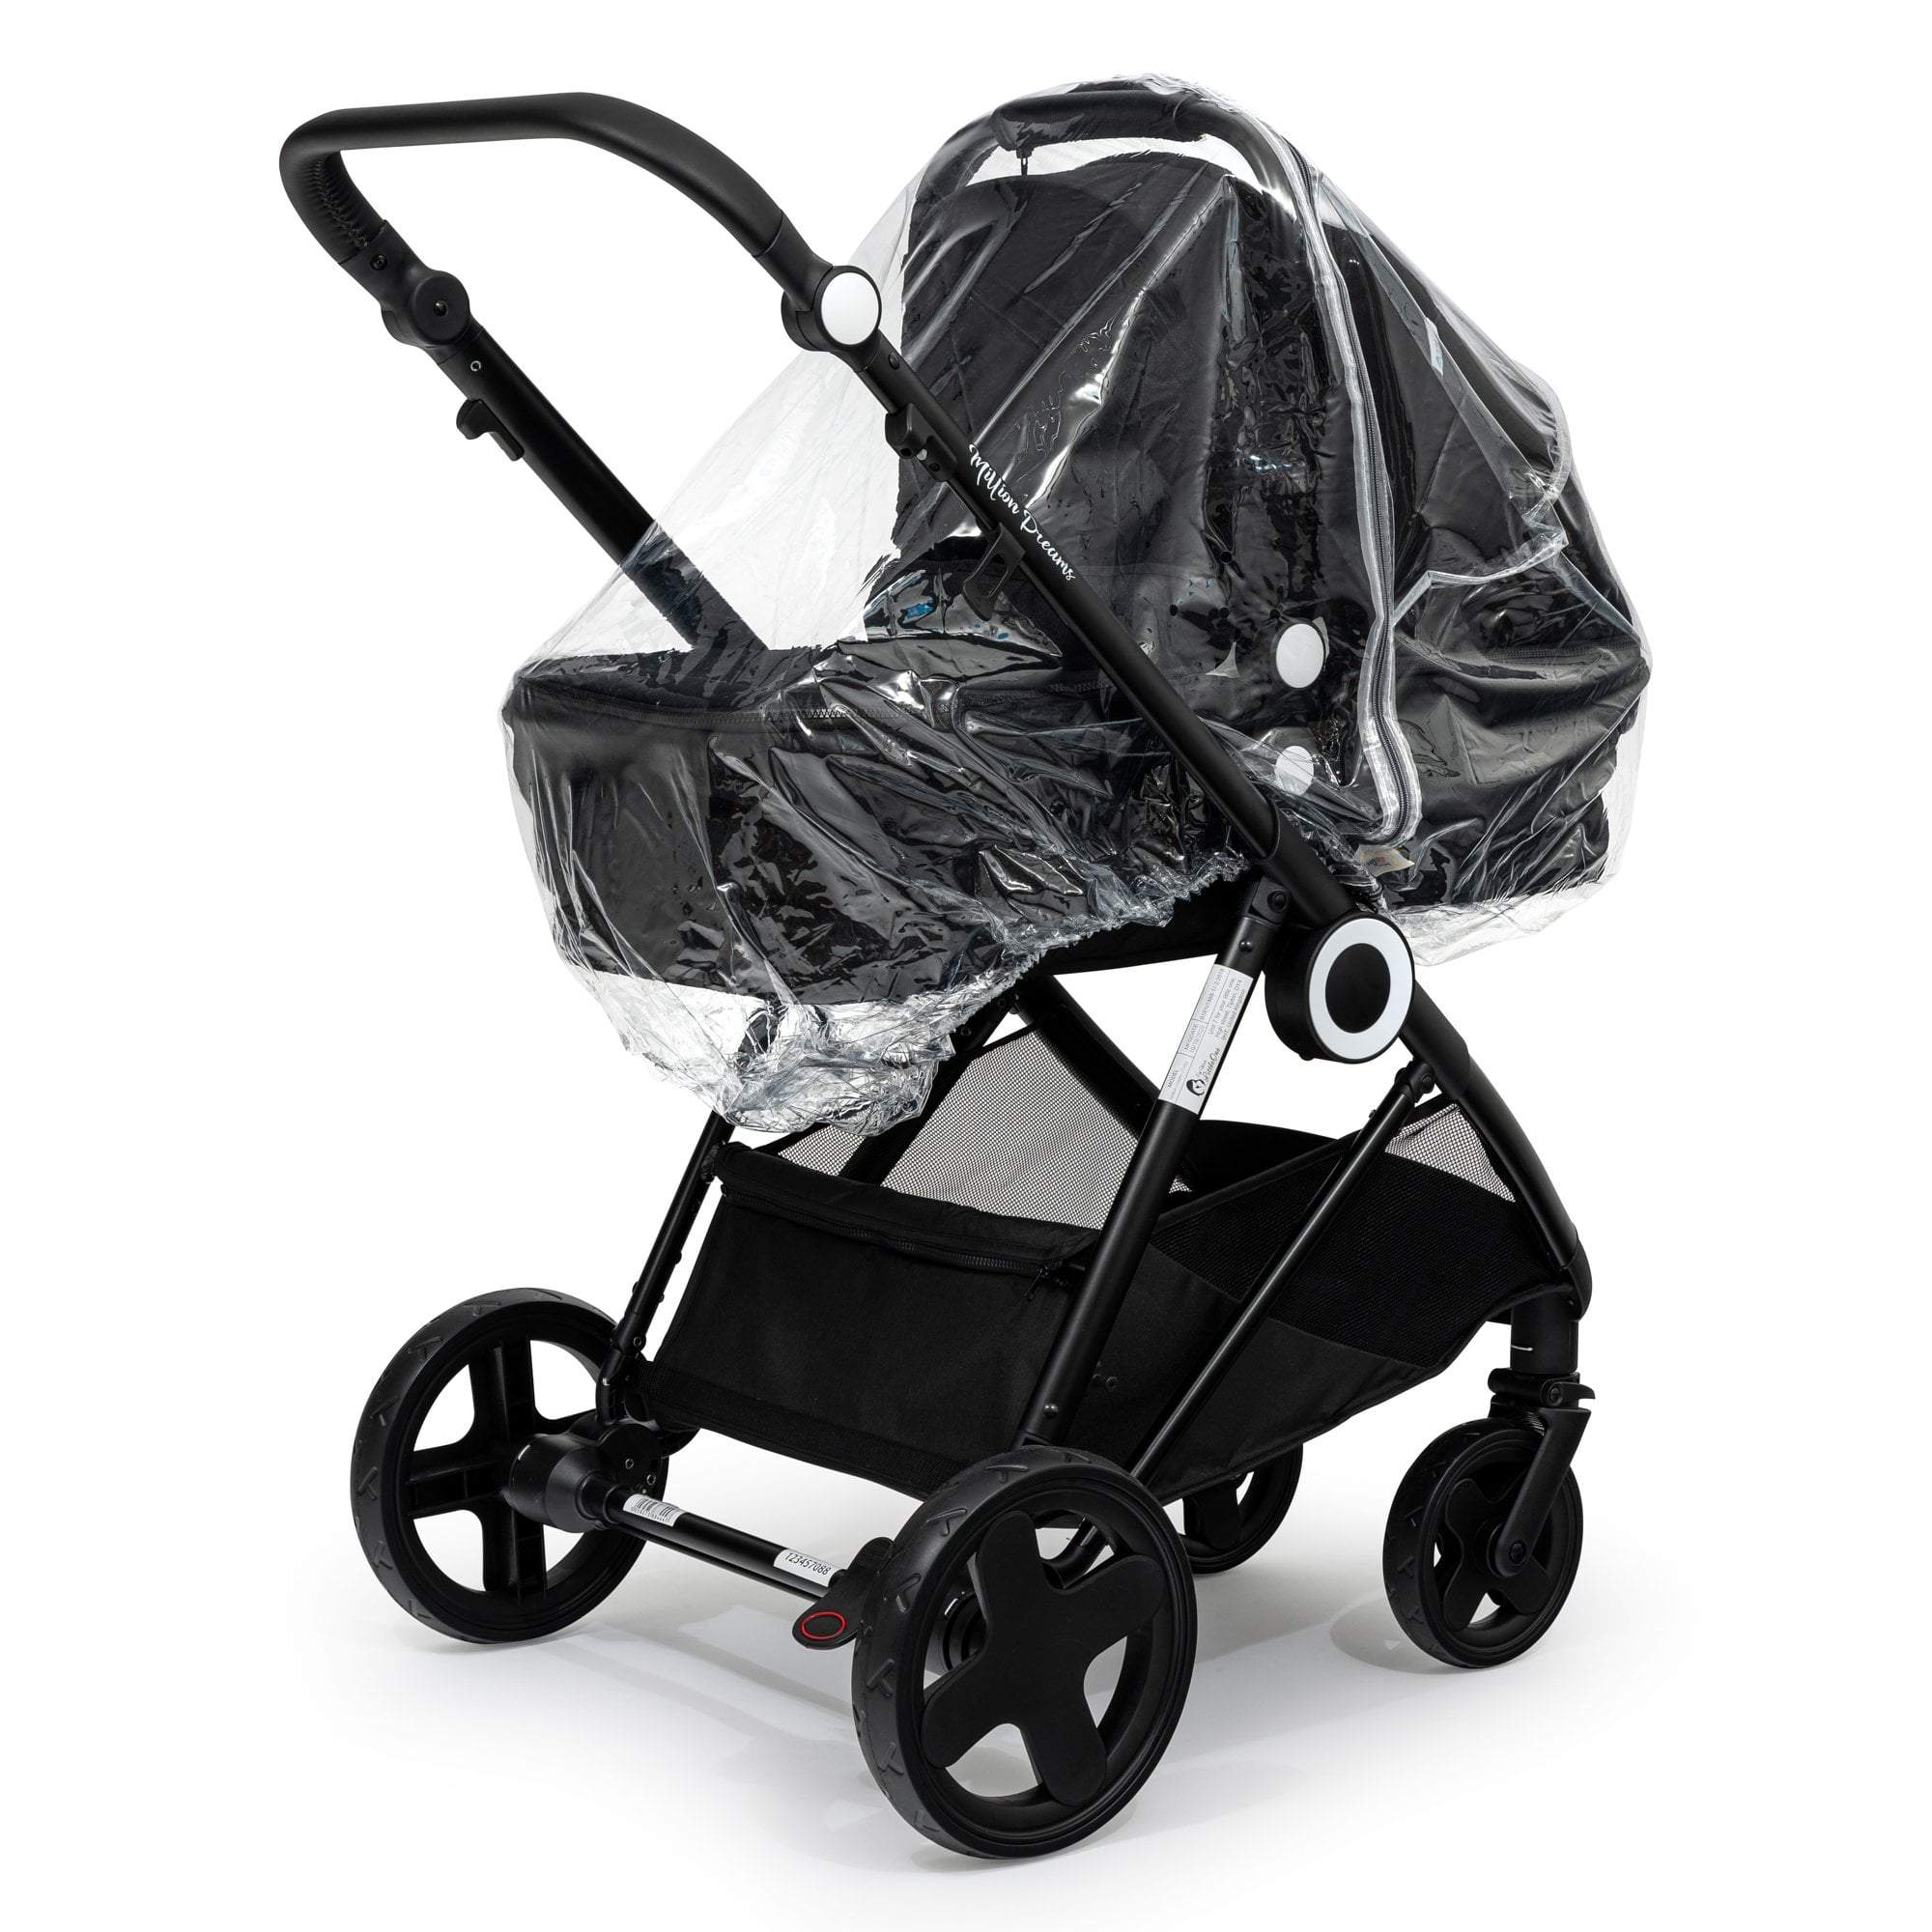 Carrycot Raincover Compatible With Bebe Confort - Fits All Models - For Your Little One